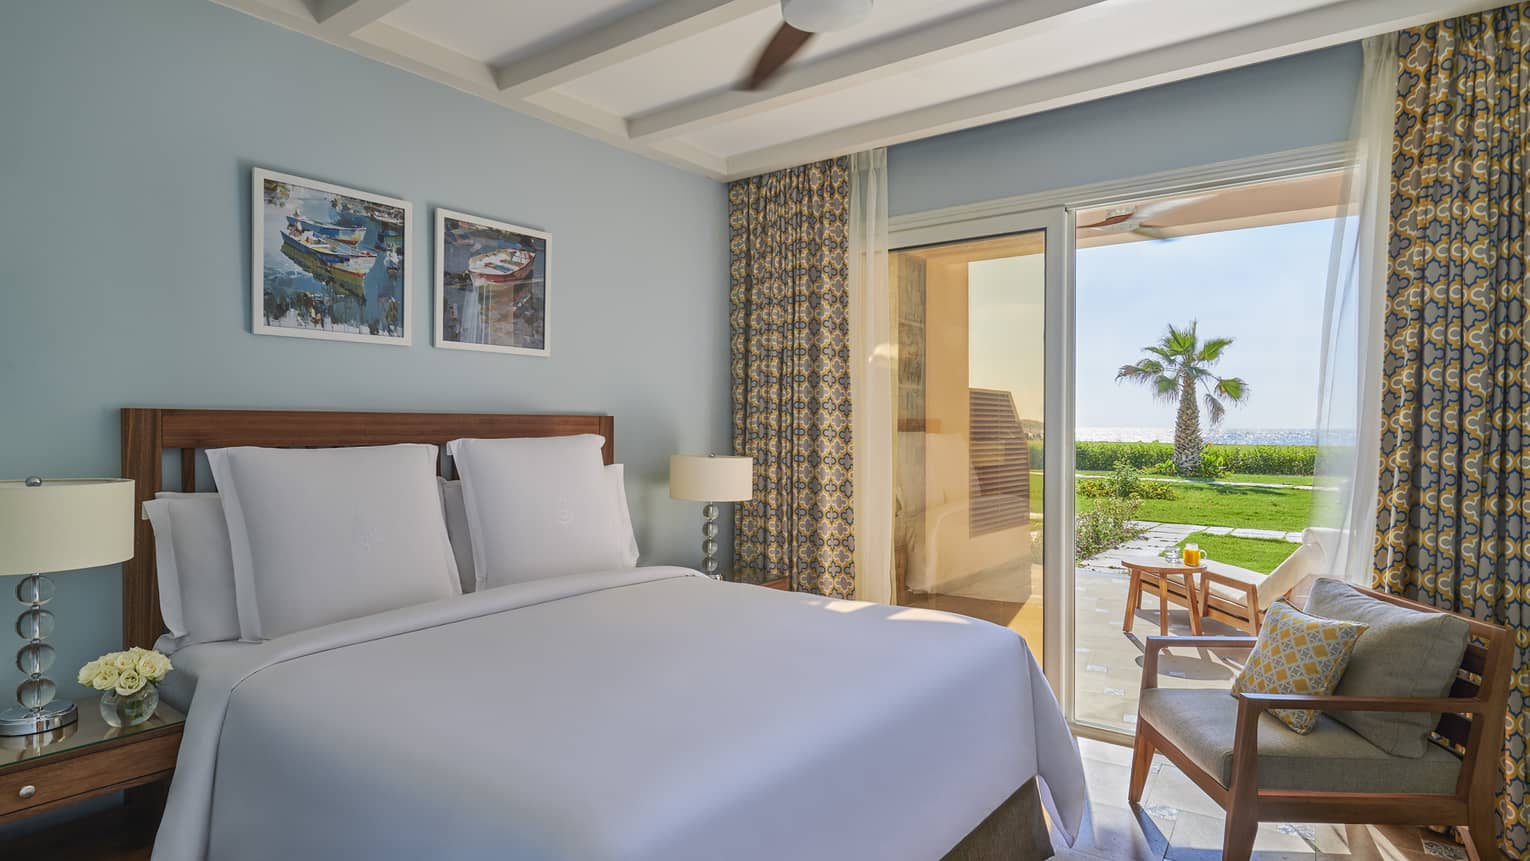 A freshly-made bed in the beach suite overlooking the marsh